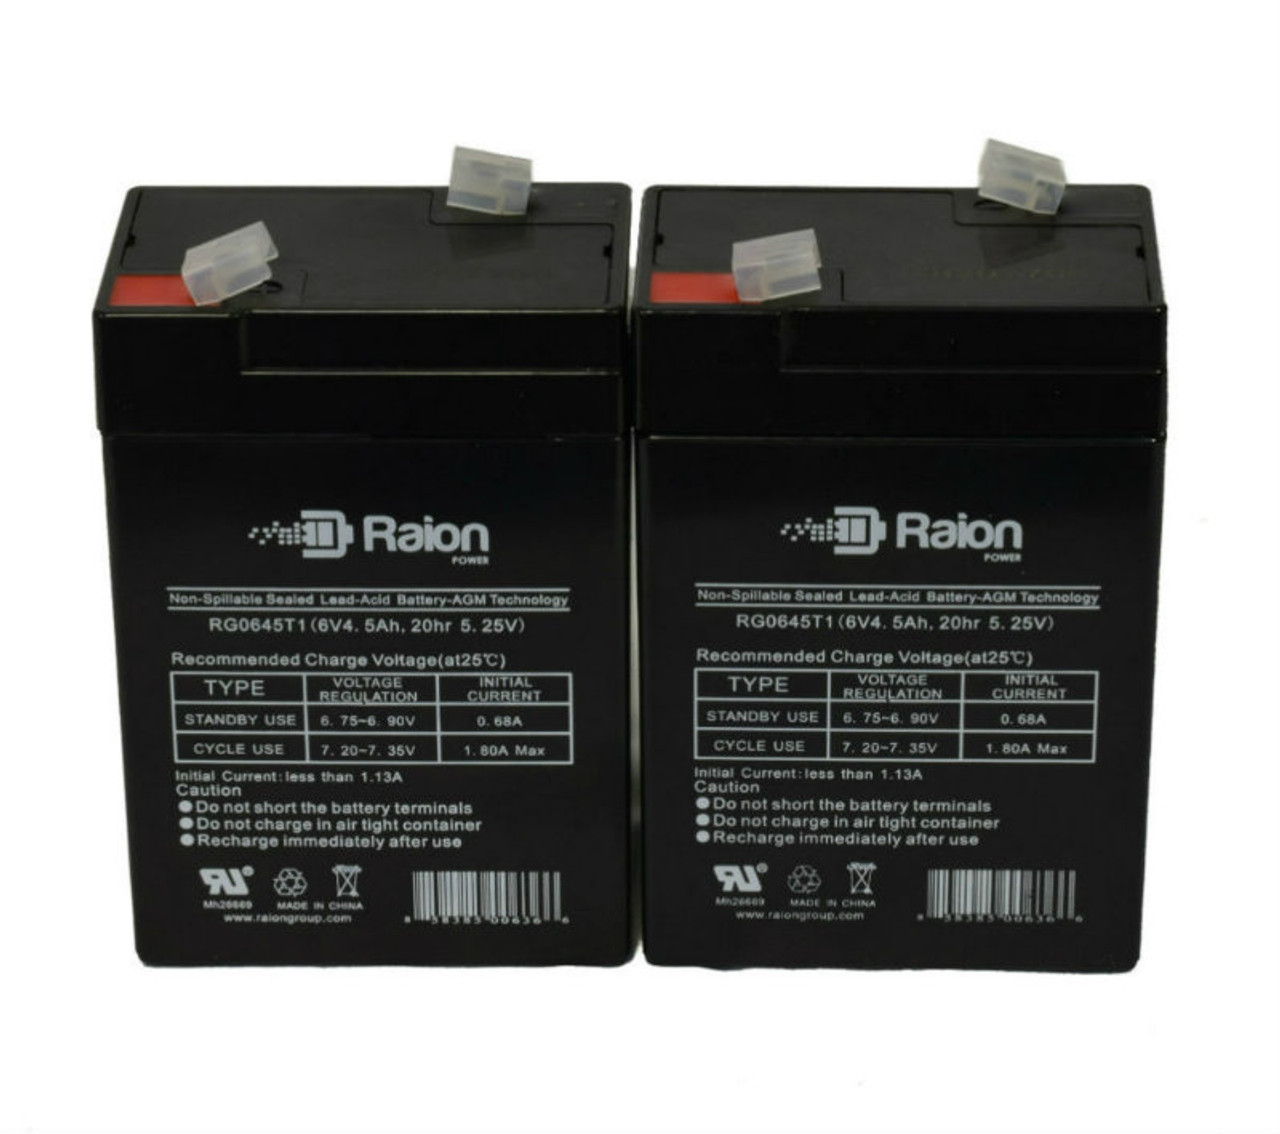 Raion Power 6V 4.5Ah Replacement Emergency Light Battery for Emergency EML-900L - 2 Pack